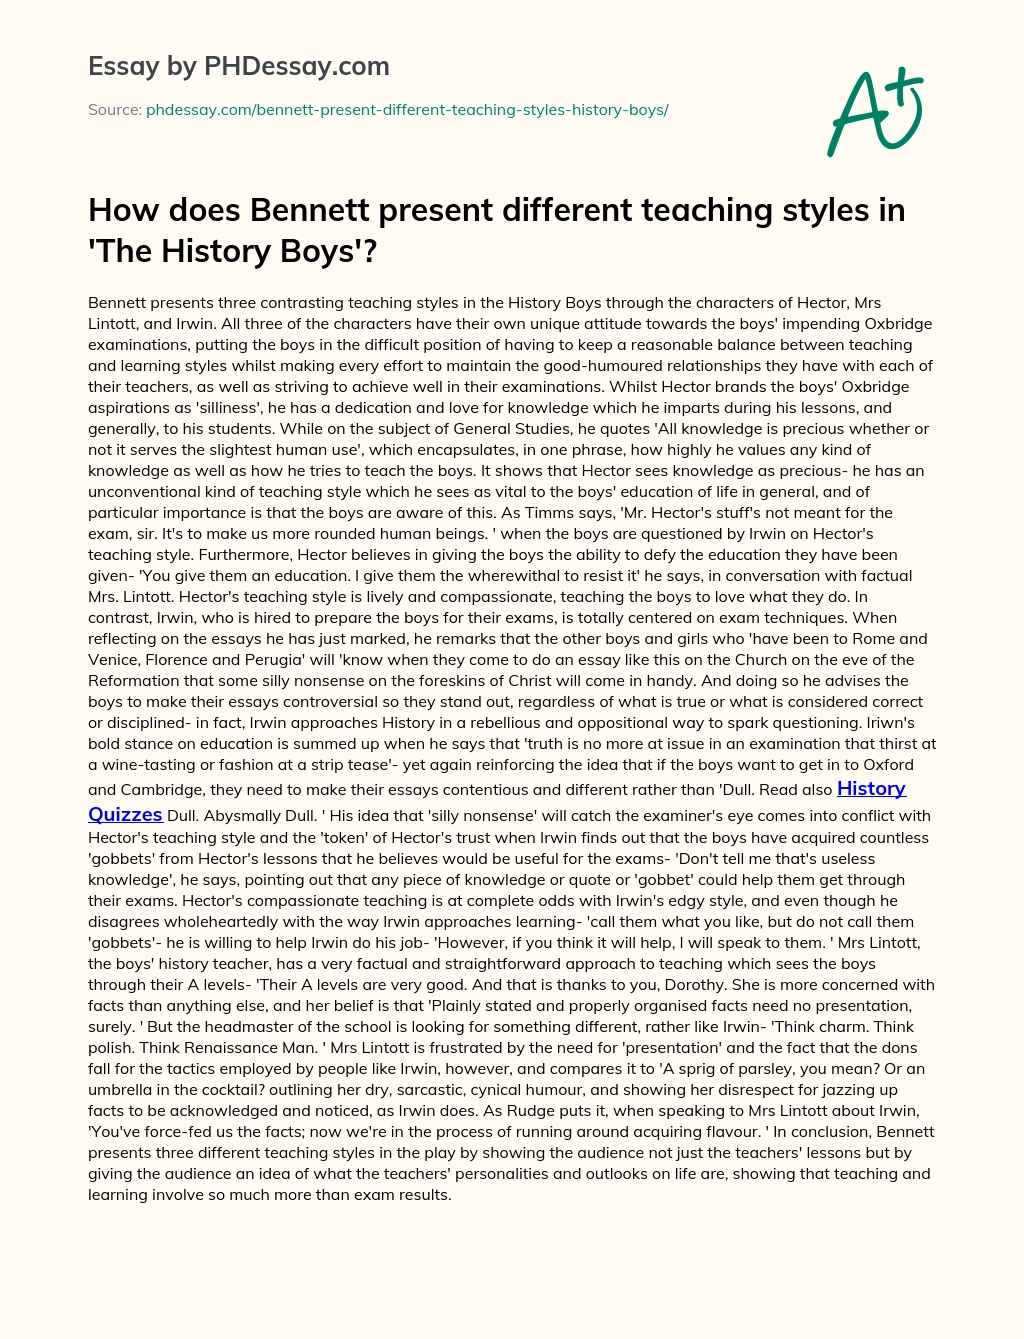 How does Bennett present different teaching styles in ‘The History Boys’? essay